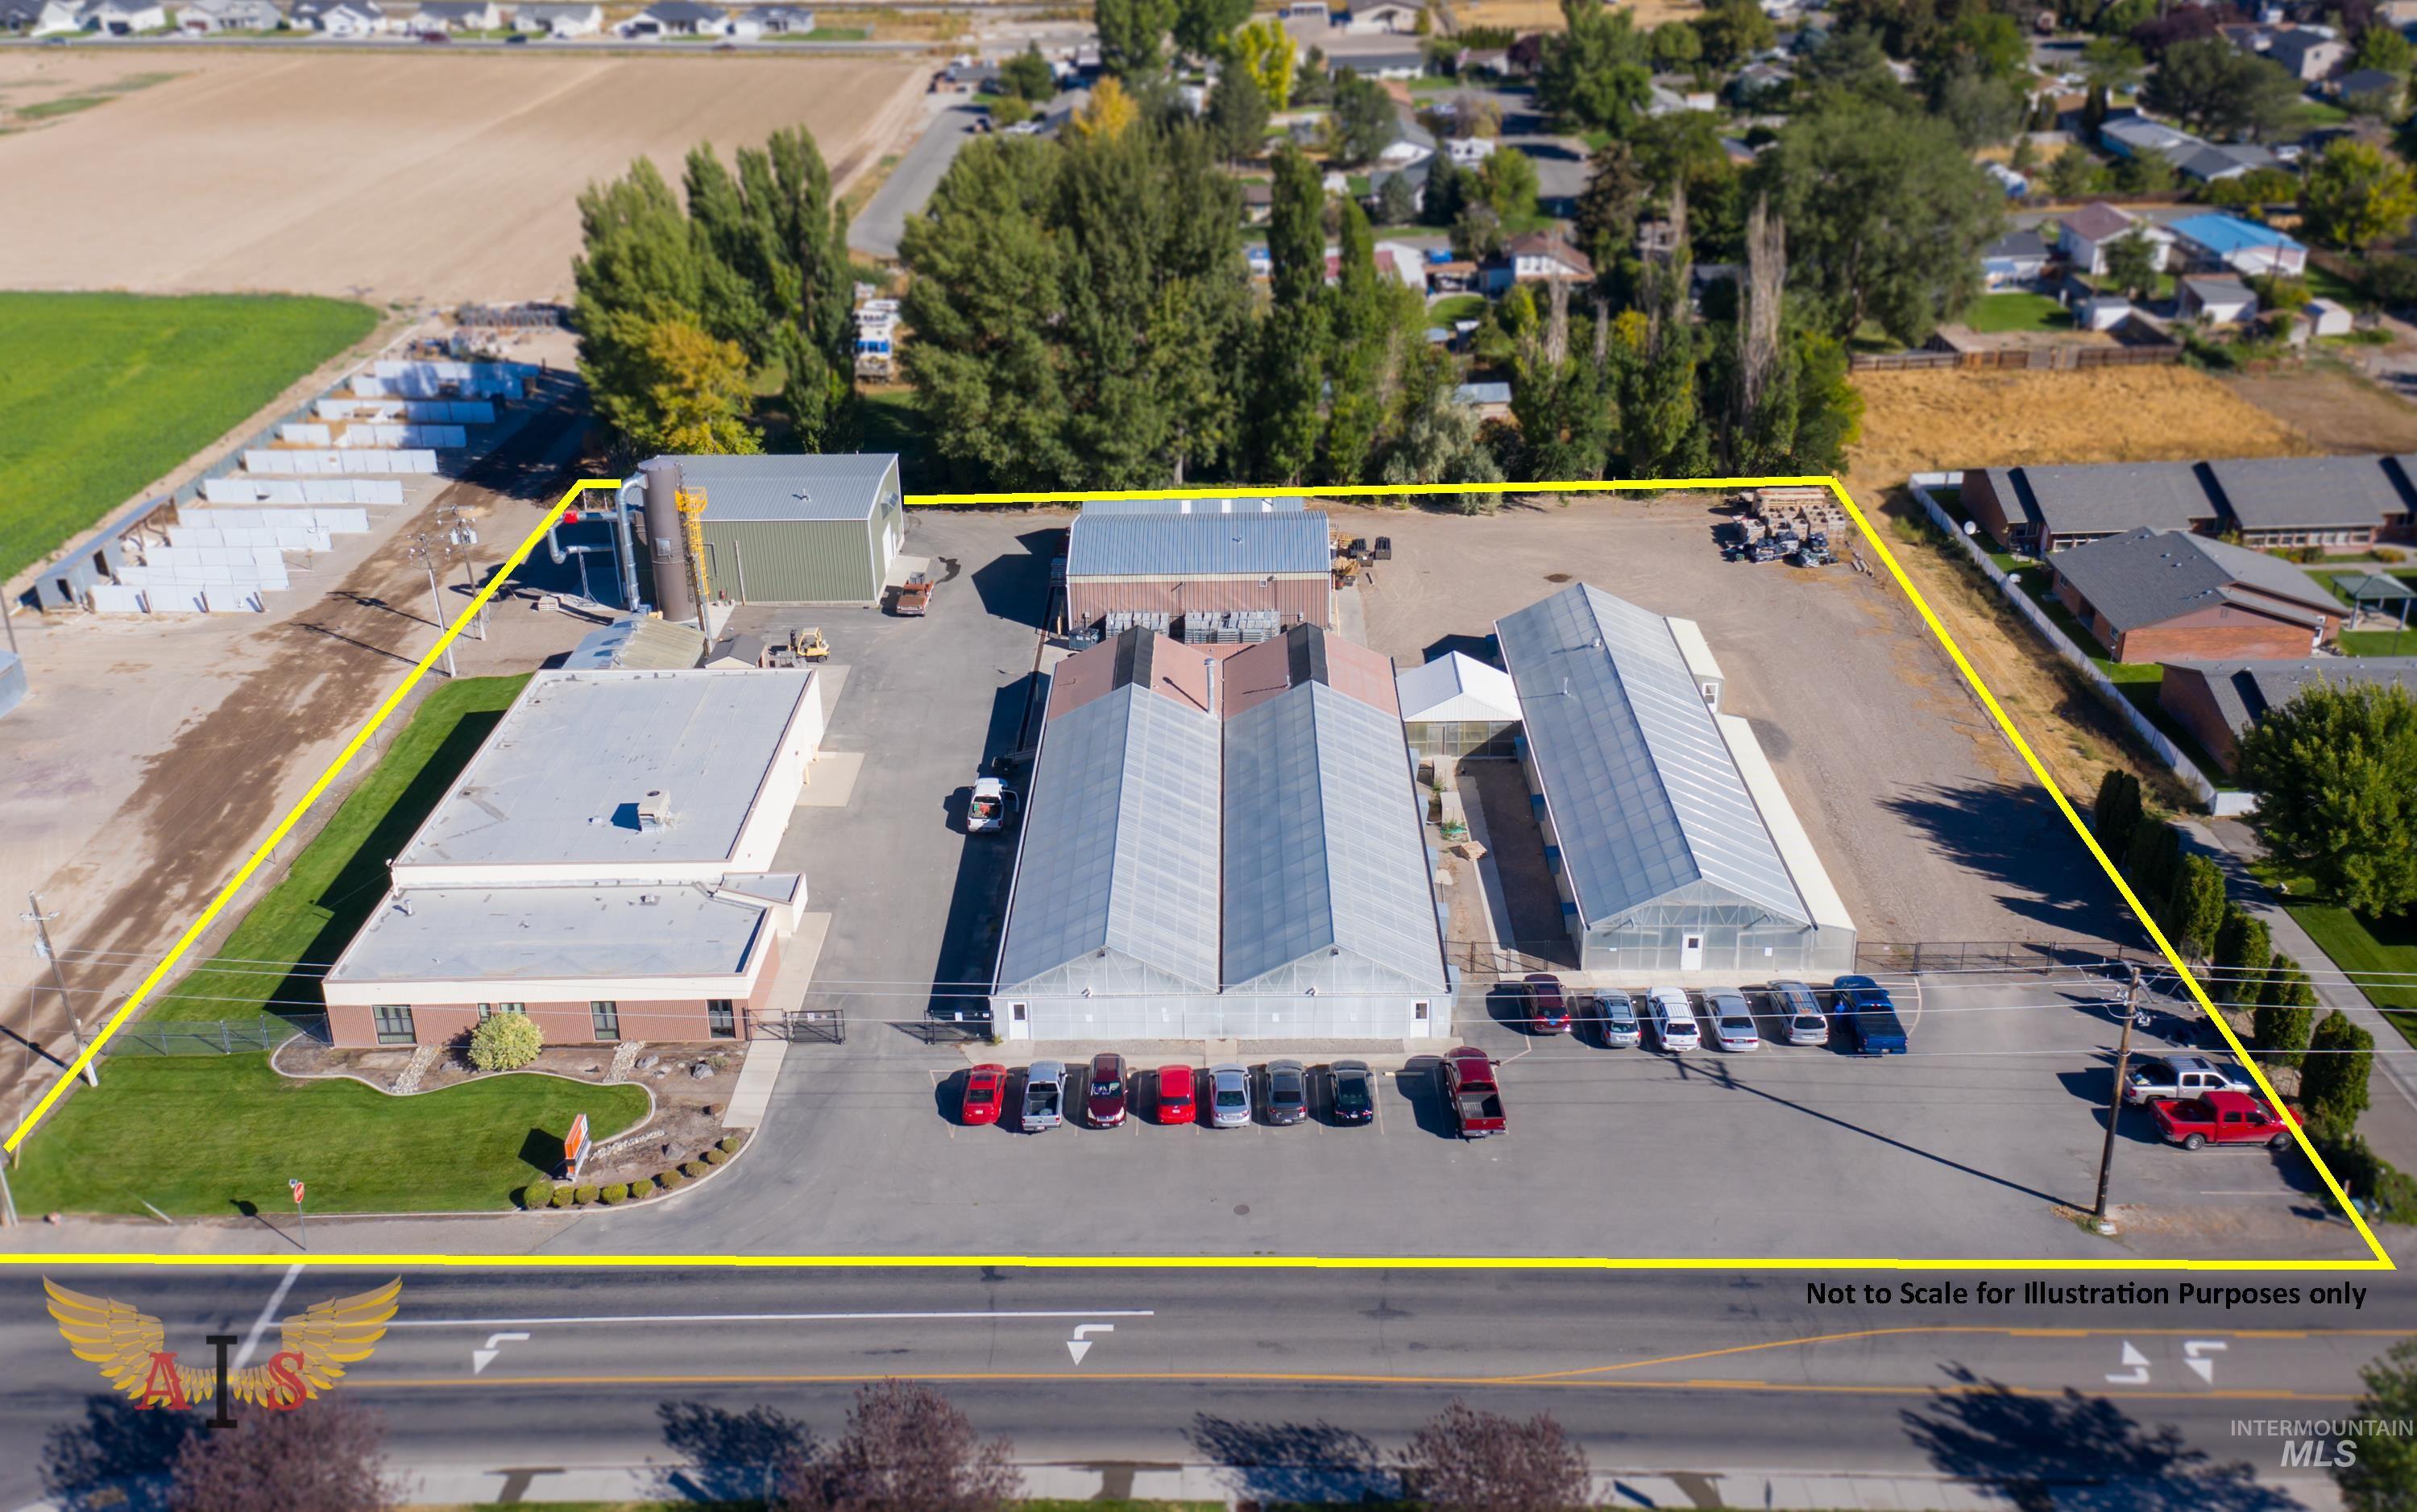 898 W Center St., Kimberly, Idaho 83341, Business/Commercial For Sale, Price $2,500,000,MLS 98861080